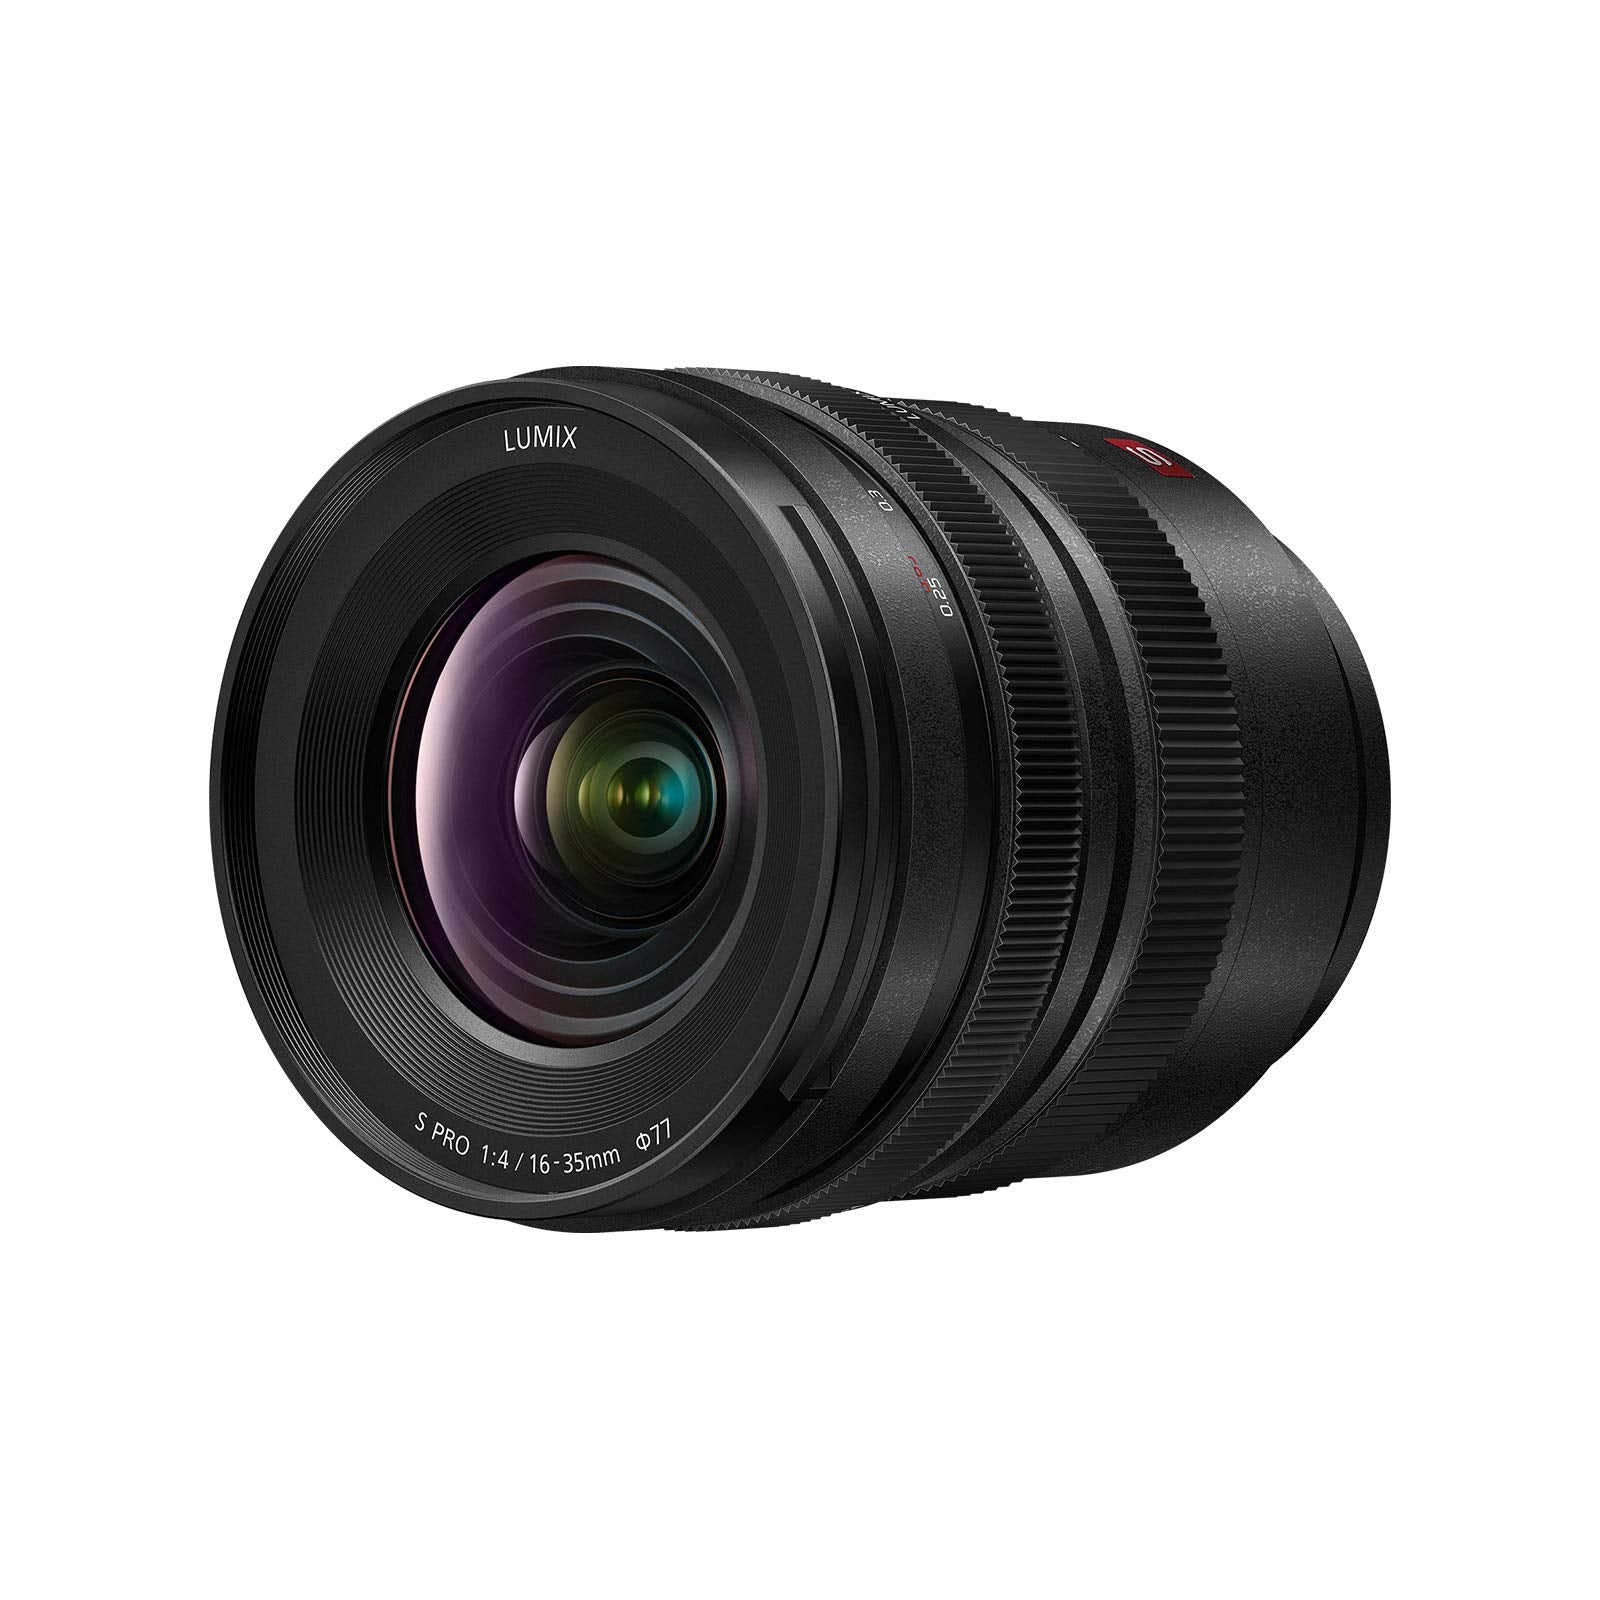 Panasonic Lumix S Pro 16-35mm F4 Wide Zoom Lens, Full-Frame L Mount, Dust/Splash/Freeze-Resistant for Lumix S Series Mirrorless Cameras - S-R1635 (USA)